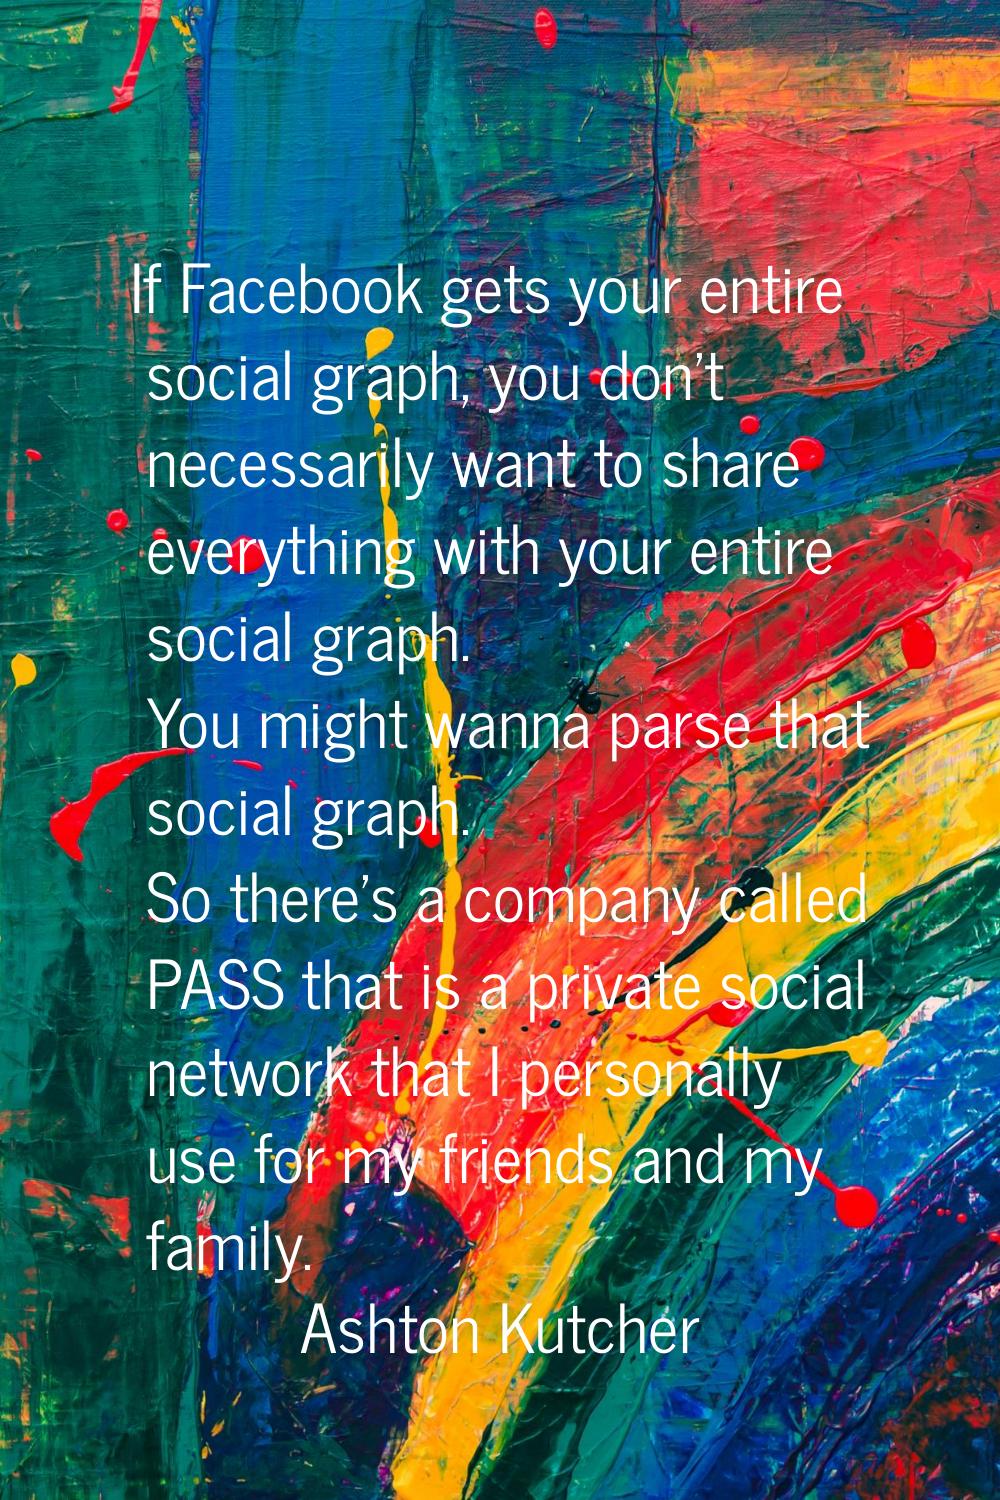 If Facebook gets your entire social graph, you don't necessarily want to share everything with your